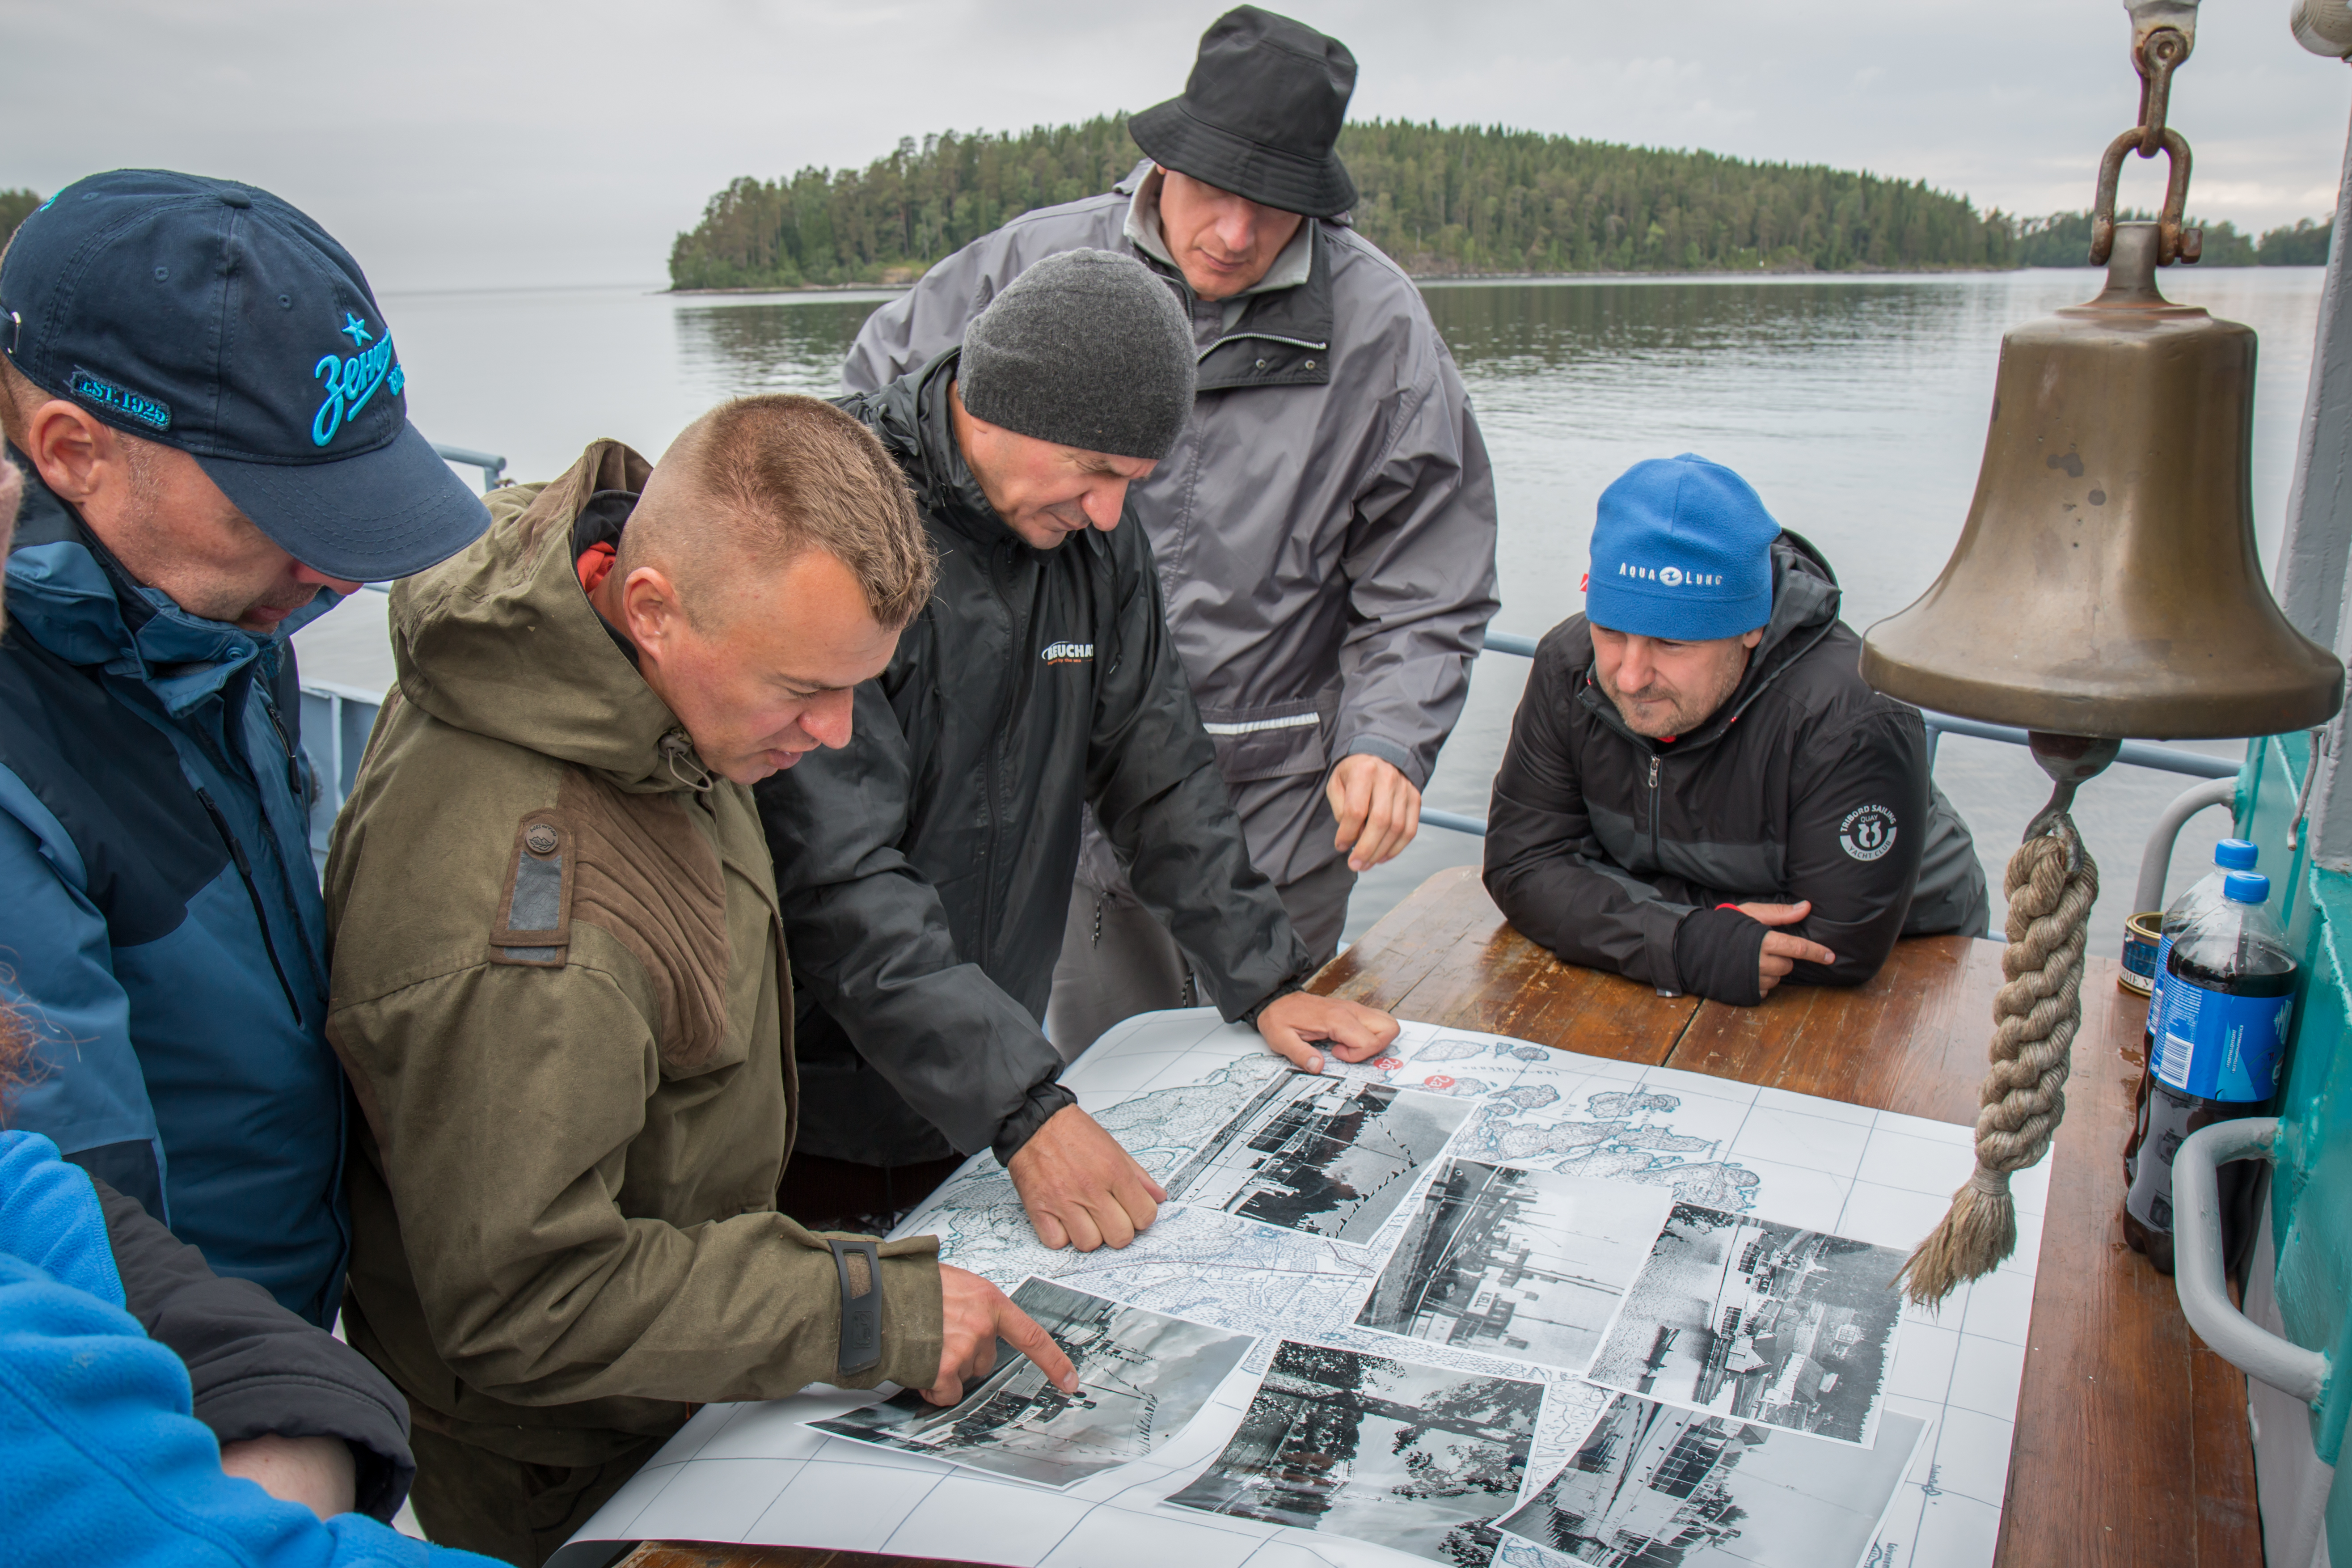 Divers study map, historical documents and photos with views of the Valamon Luostari. Photo by Stanislav Trofimov.